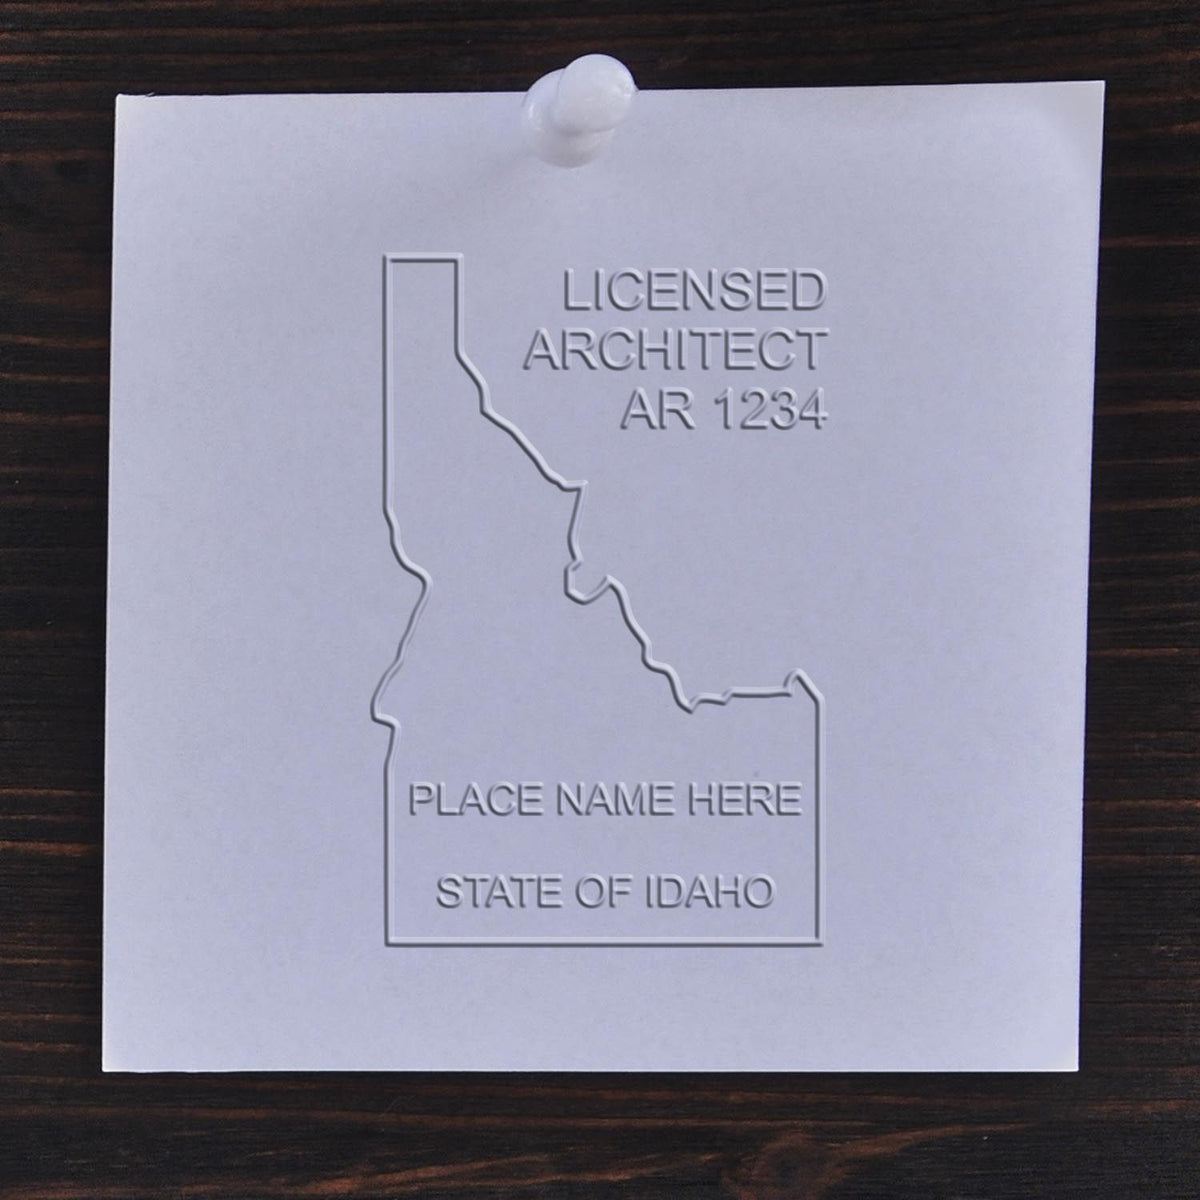 A photograph of the Hybrid Idaho Architect Seal stamp impression reveals a vivid, professional image of the on paper.